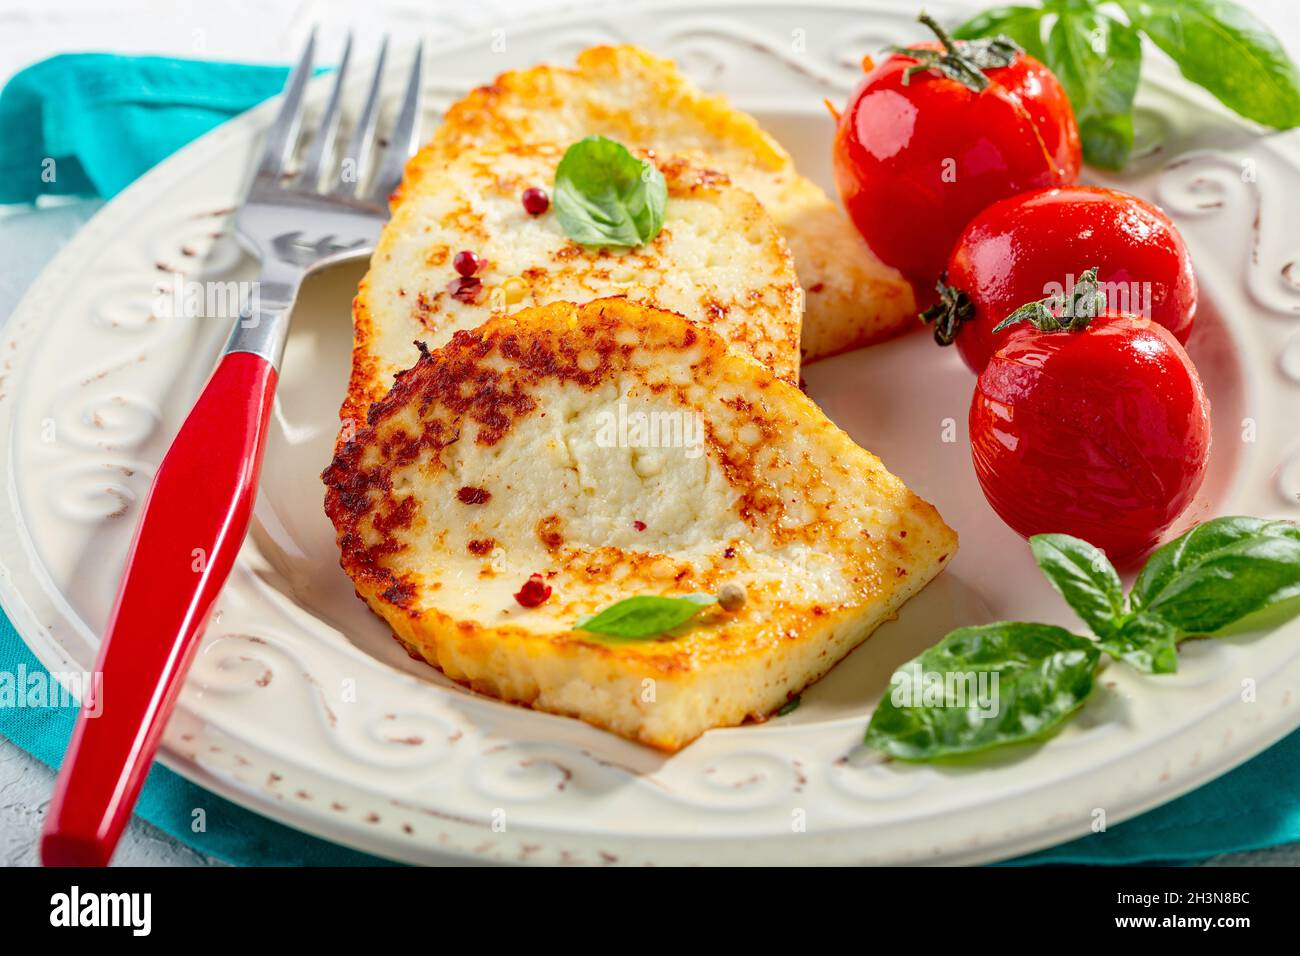 Grilled traditional halloumi cheese. Stock Photo